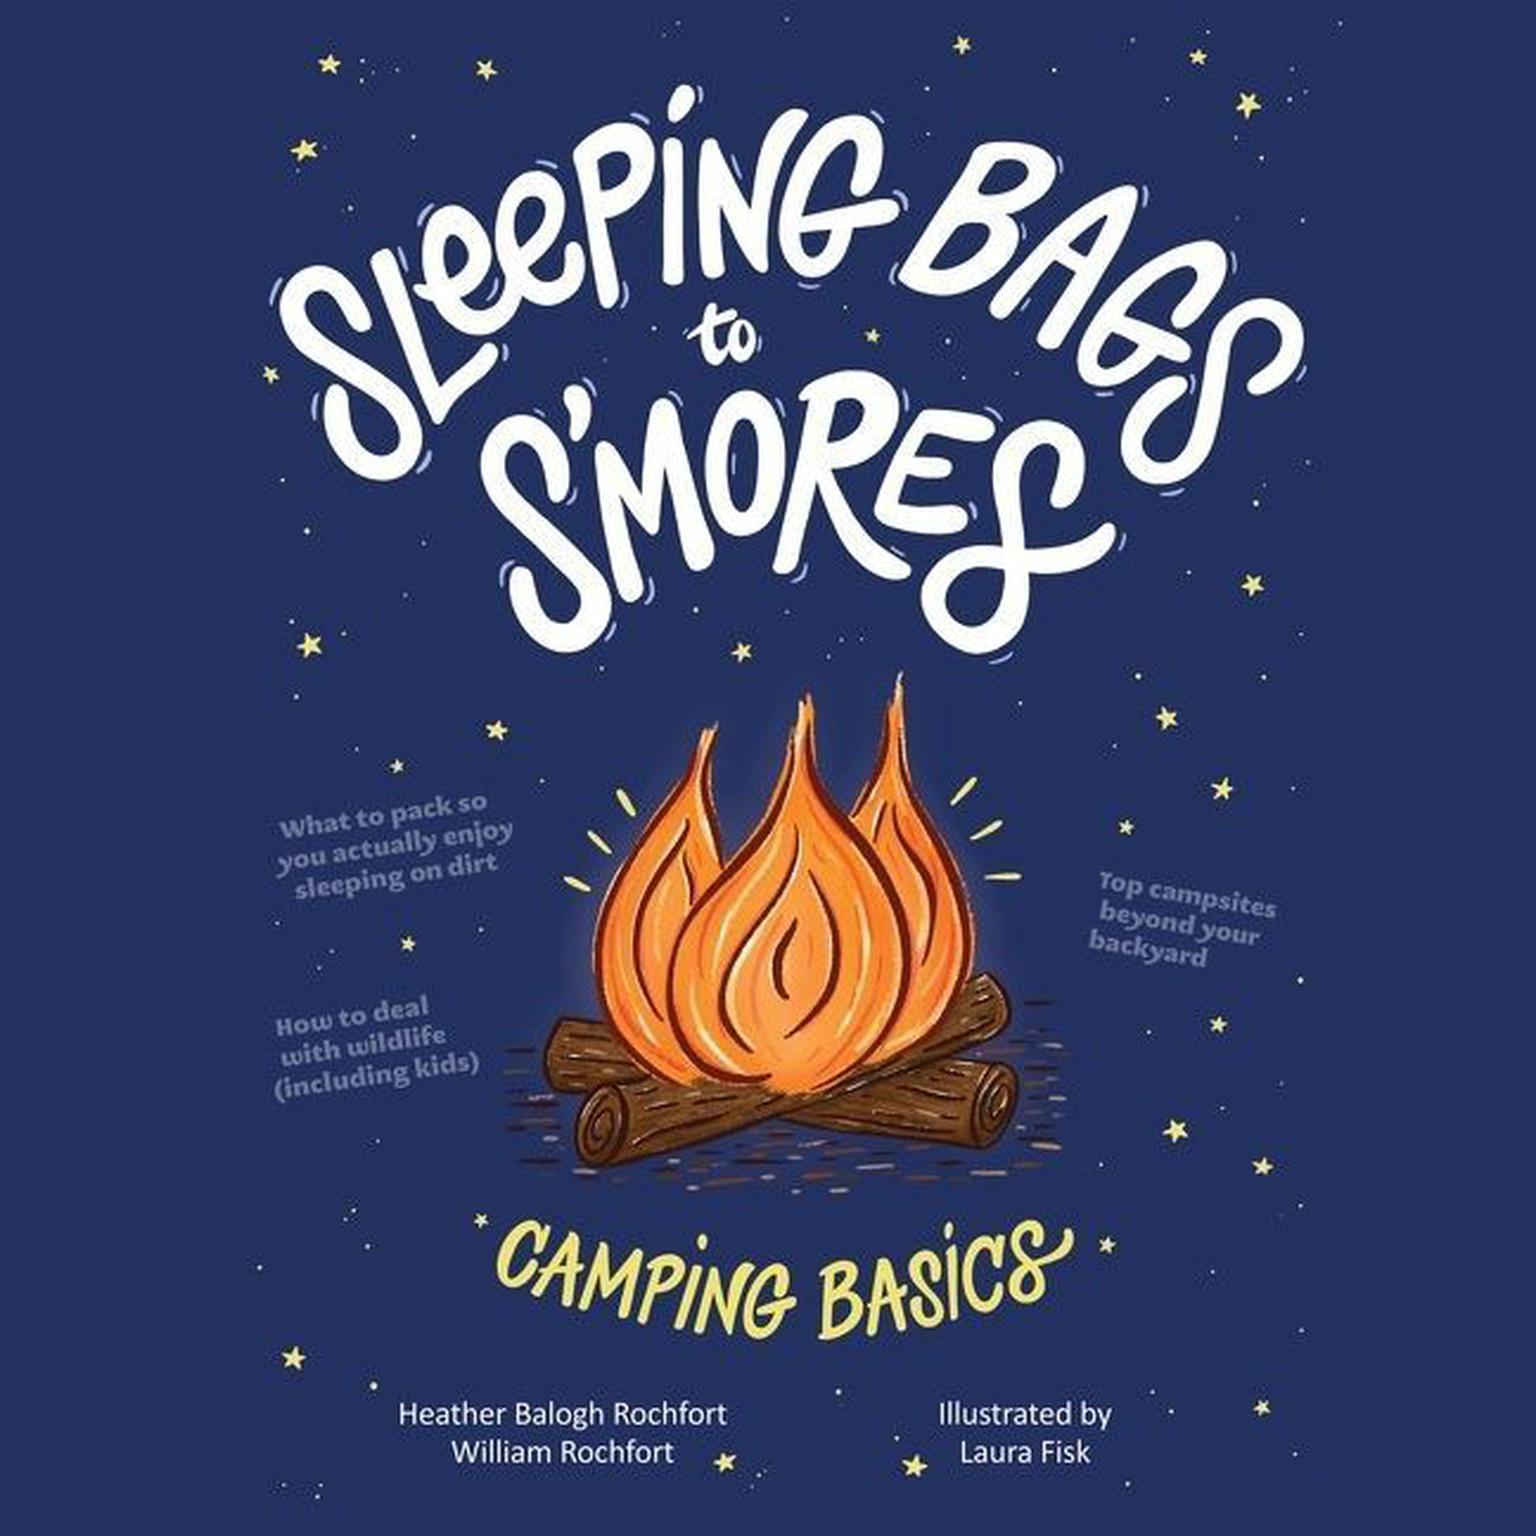 Sleeping Bags To Smores: Camping Basics Audiobook, by Heather Balogh Rochfort